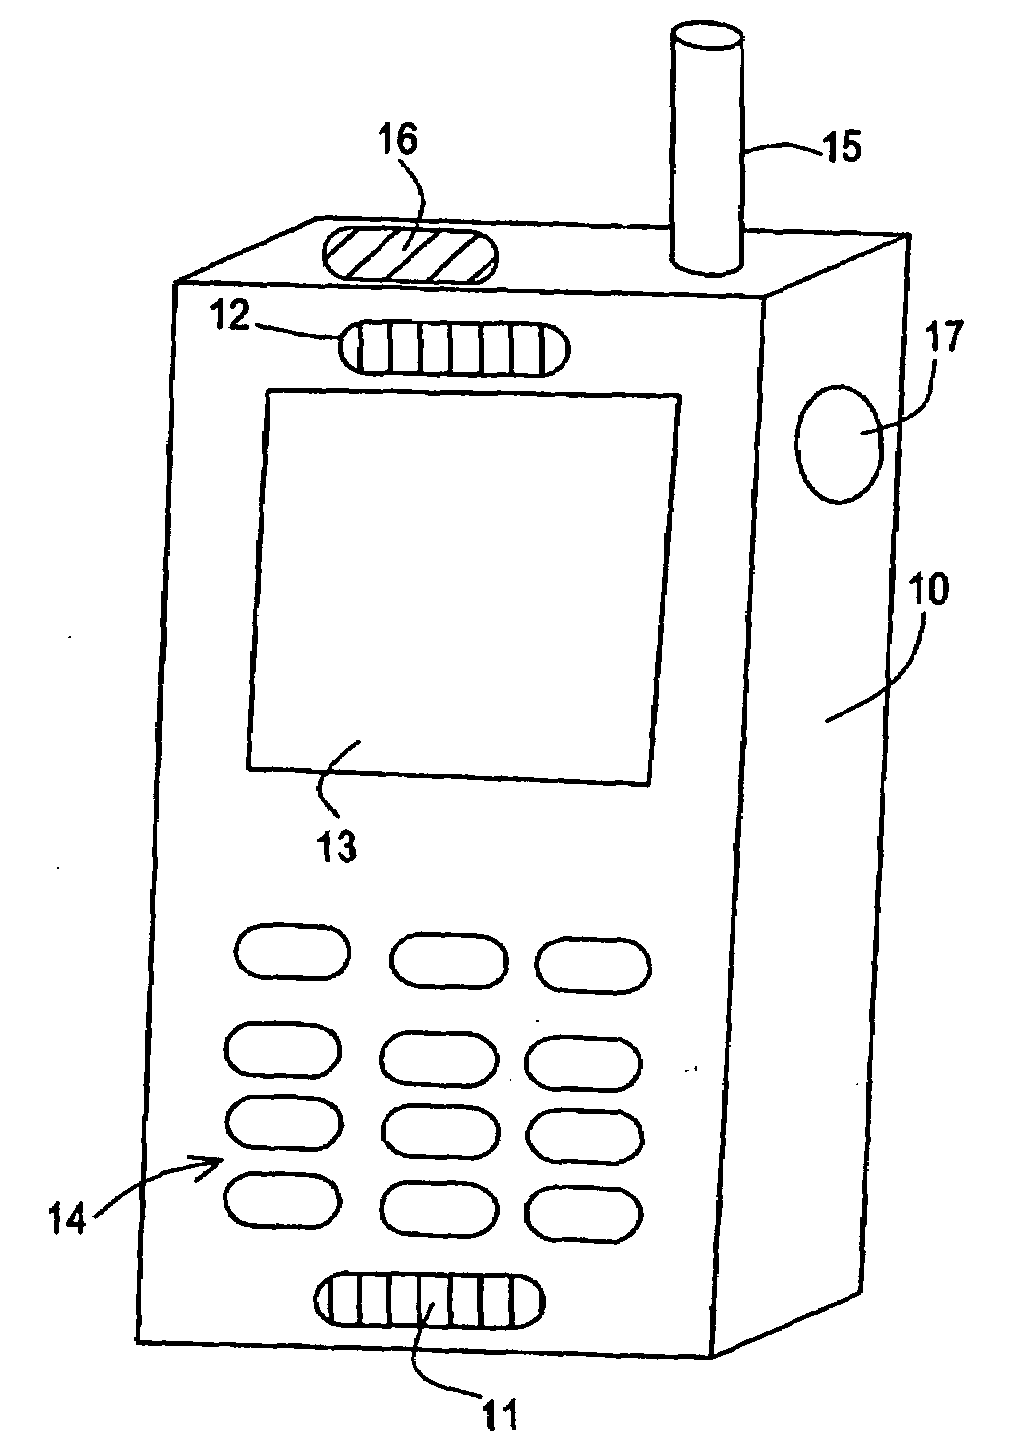 Environmental noise reduction and cancellation for a voice over internet packets (VOIP) communication device